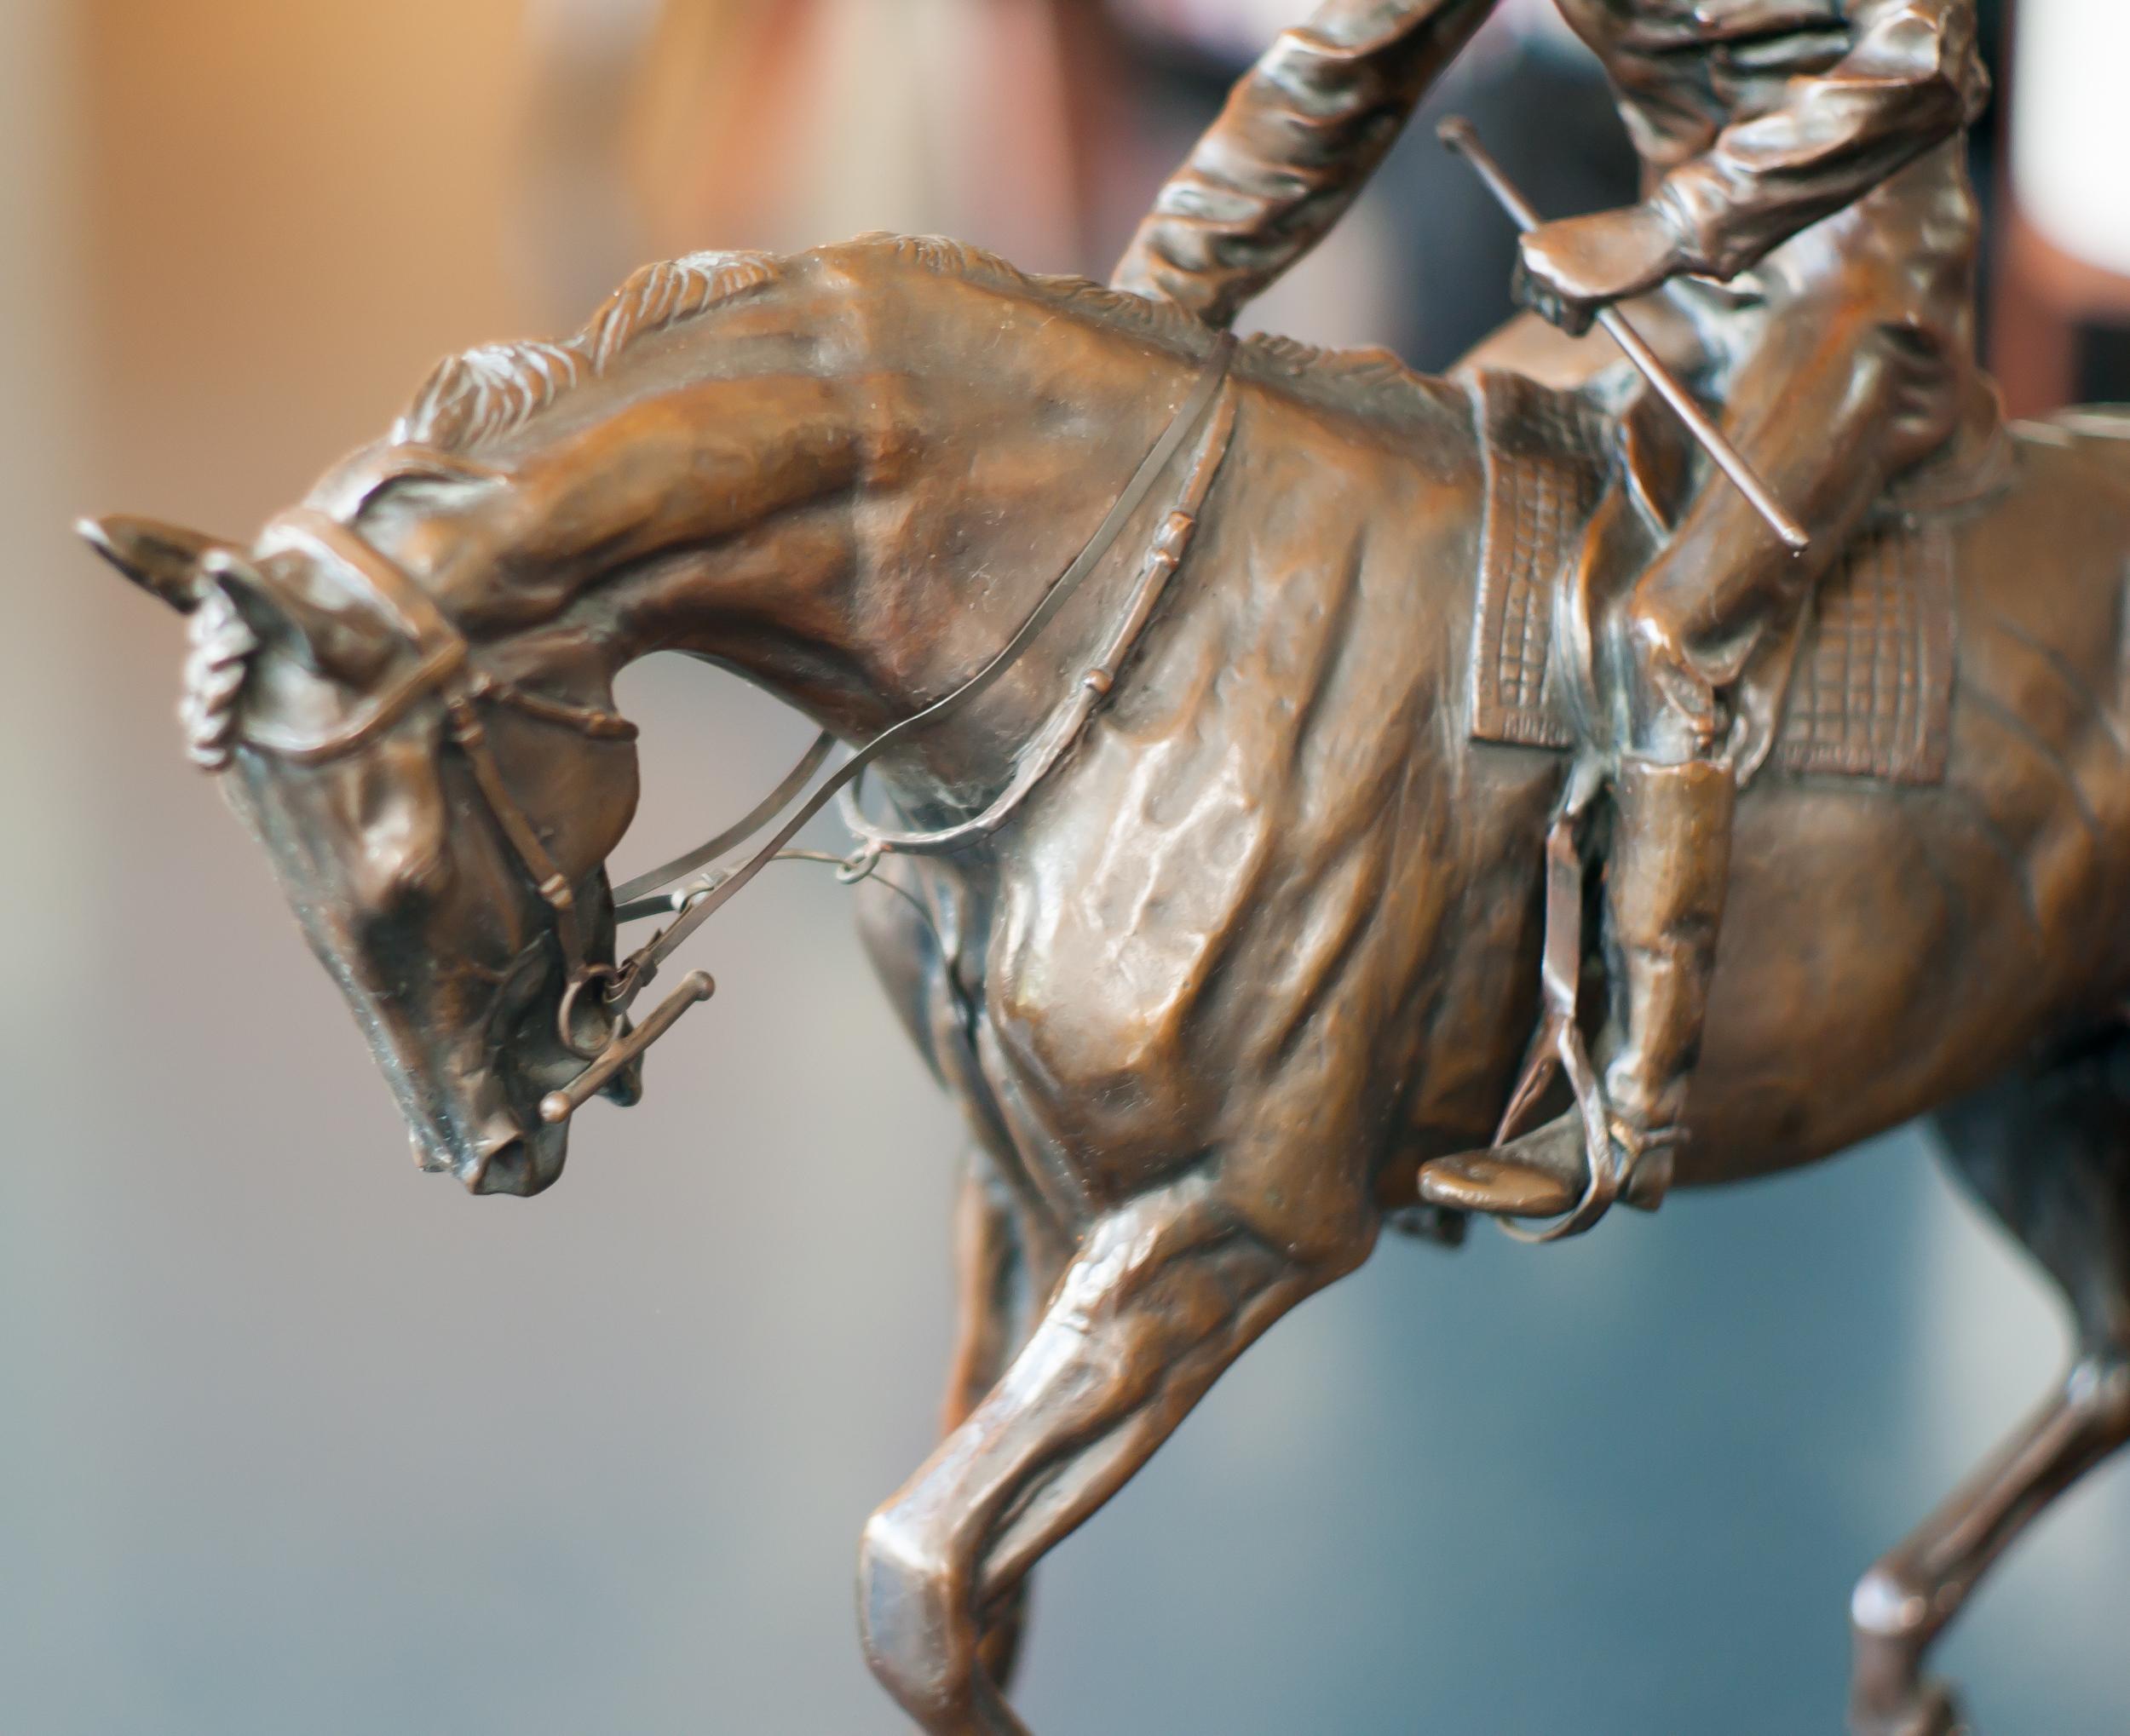 Amongst Bonheur's wide variety of animal sculptures exhibited at the Salon, the most famous is Le Grand Jockey, of which the present cast is a Fine example. The sensitivity of the casting which perfectly translates the skilful modelling of the horse